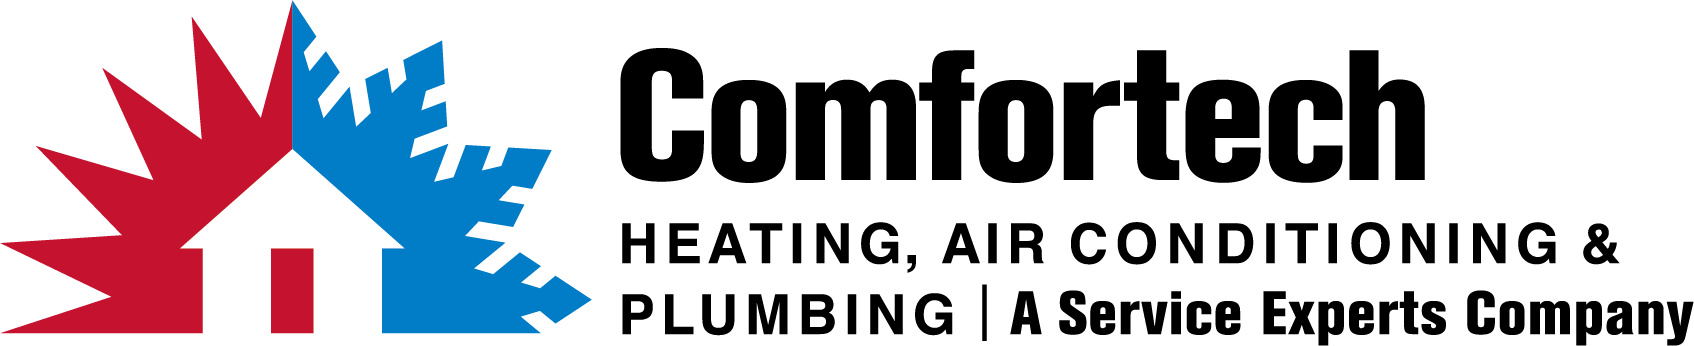 Amana Heating and Air Logo - Amana Heating & Cooling Services in Jackson| Comfortech Service Experts